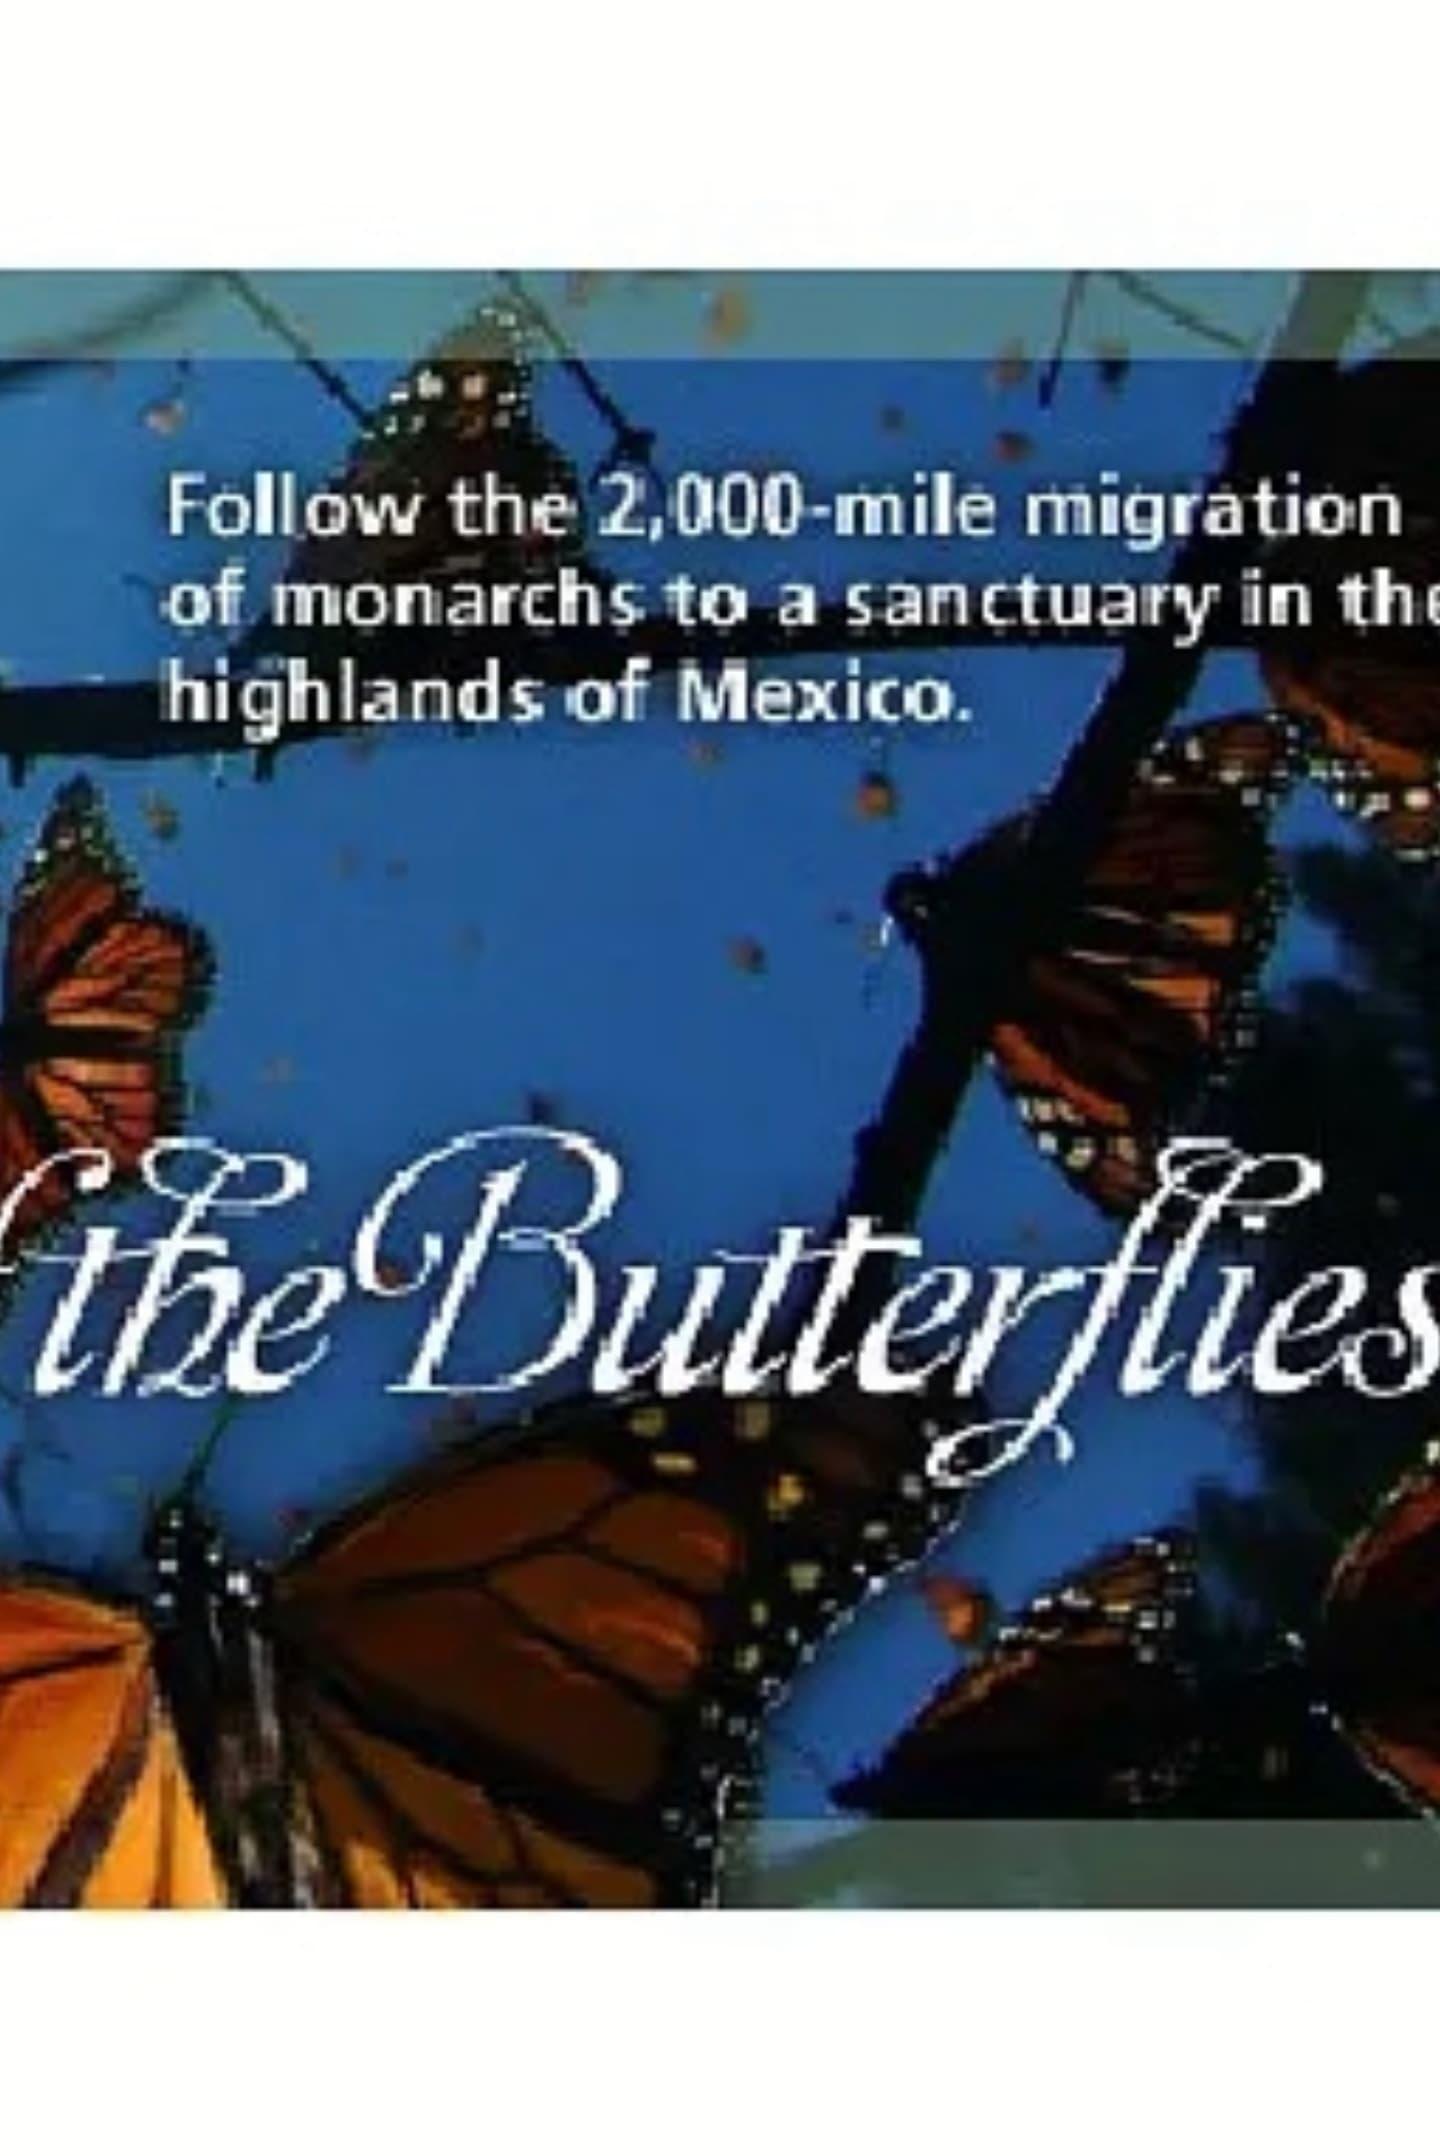 The Incredible Journey of the Butterflies poster